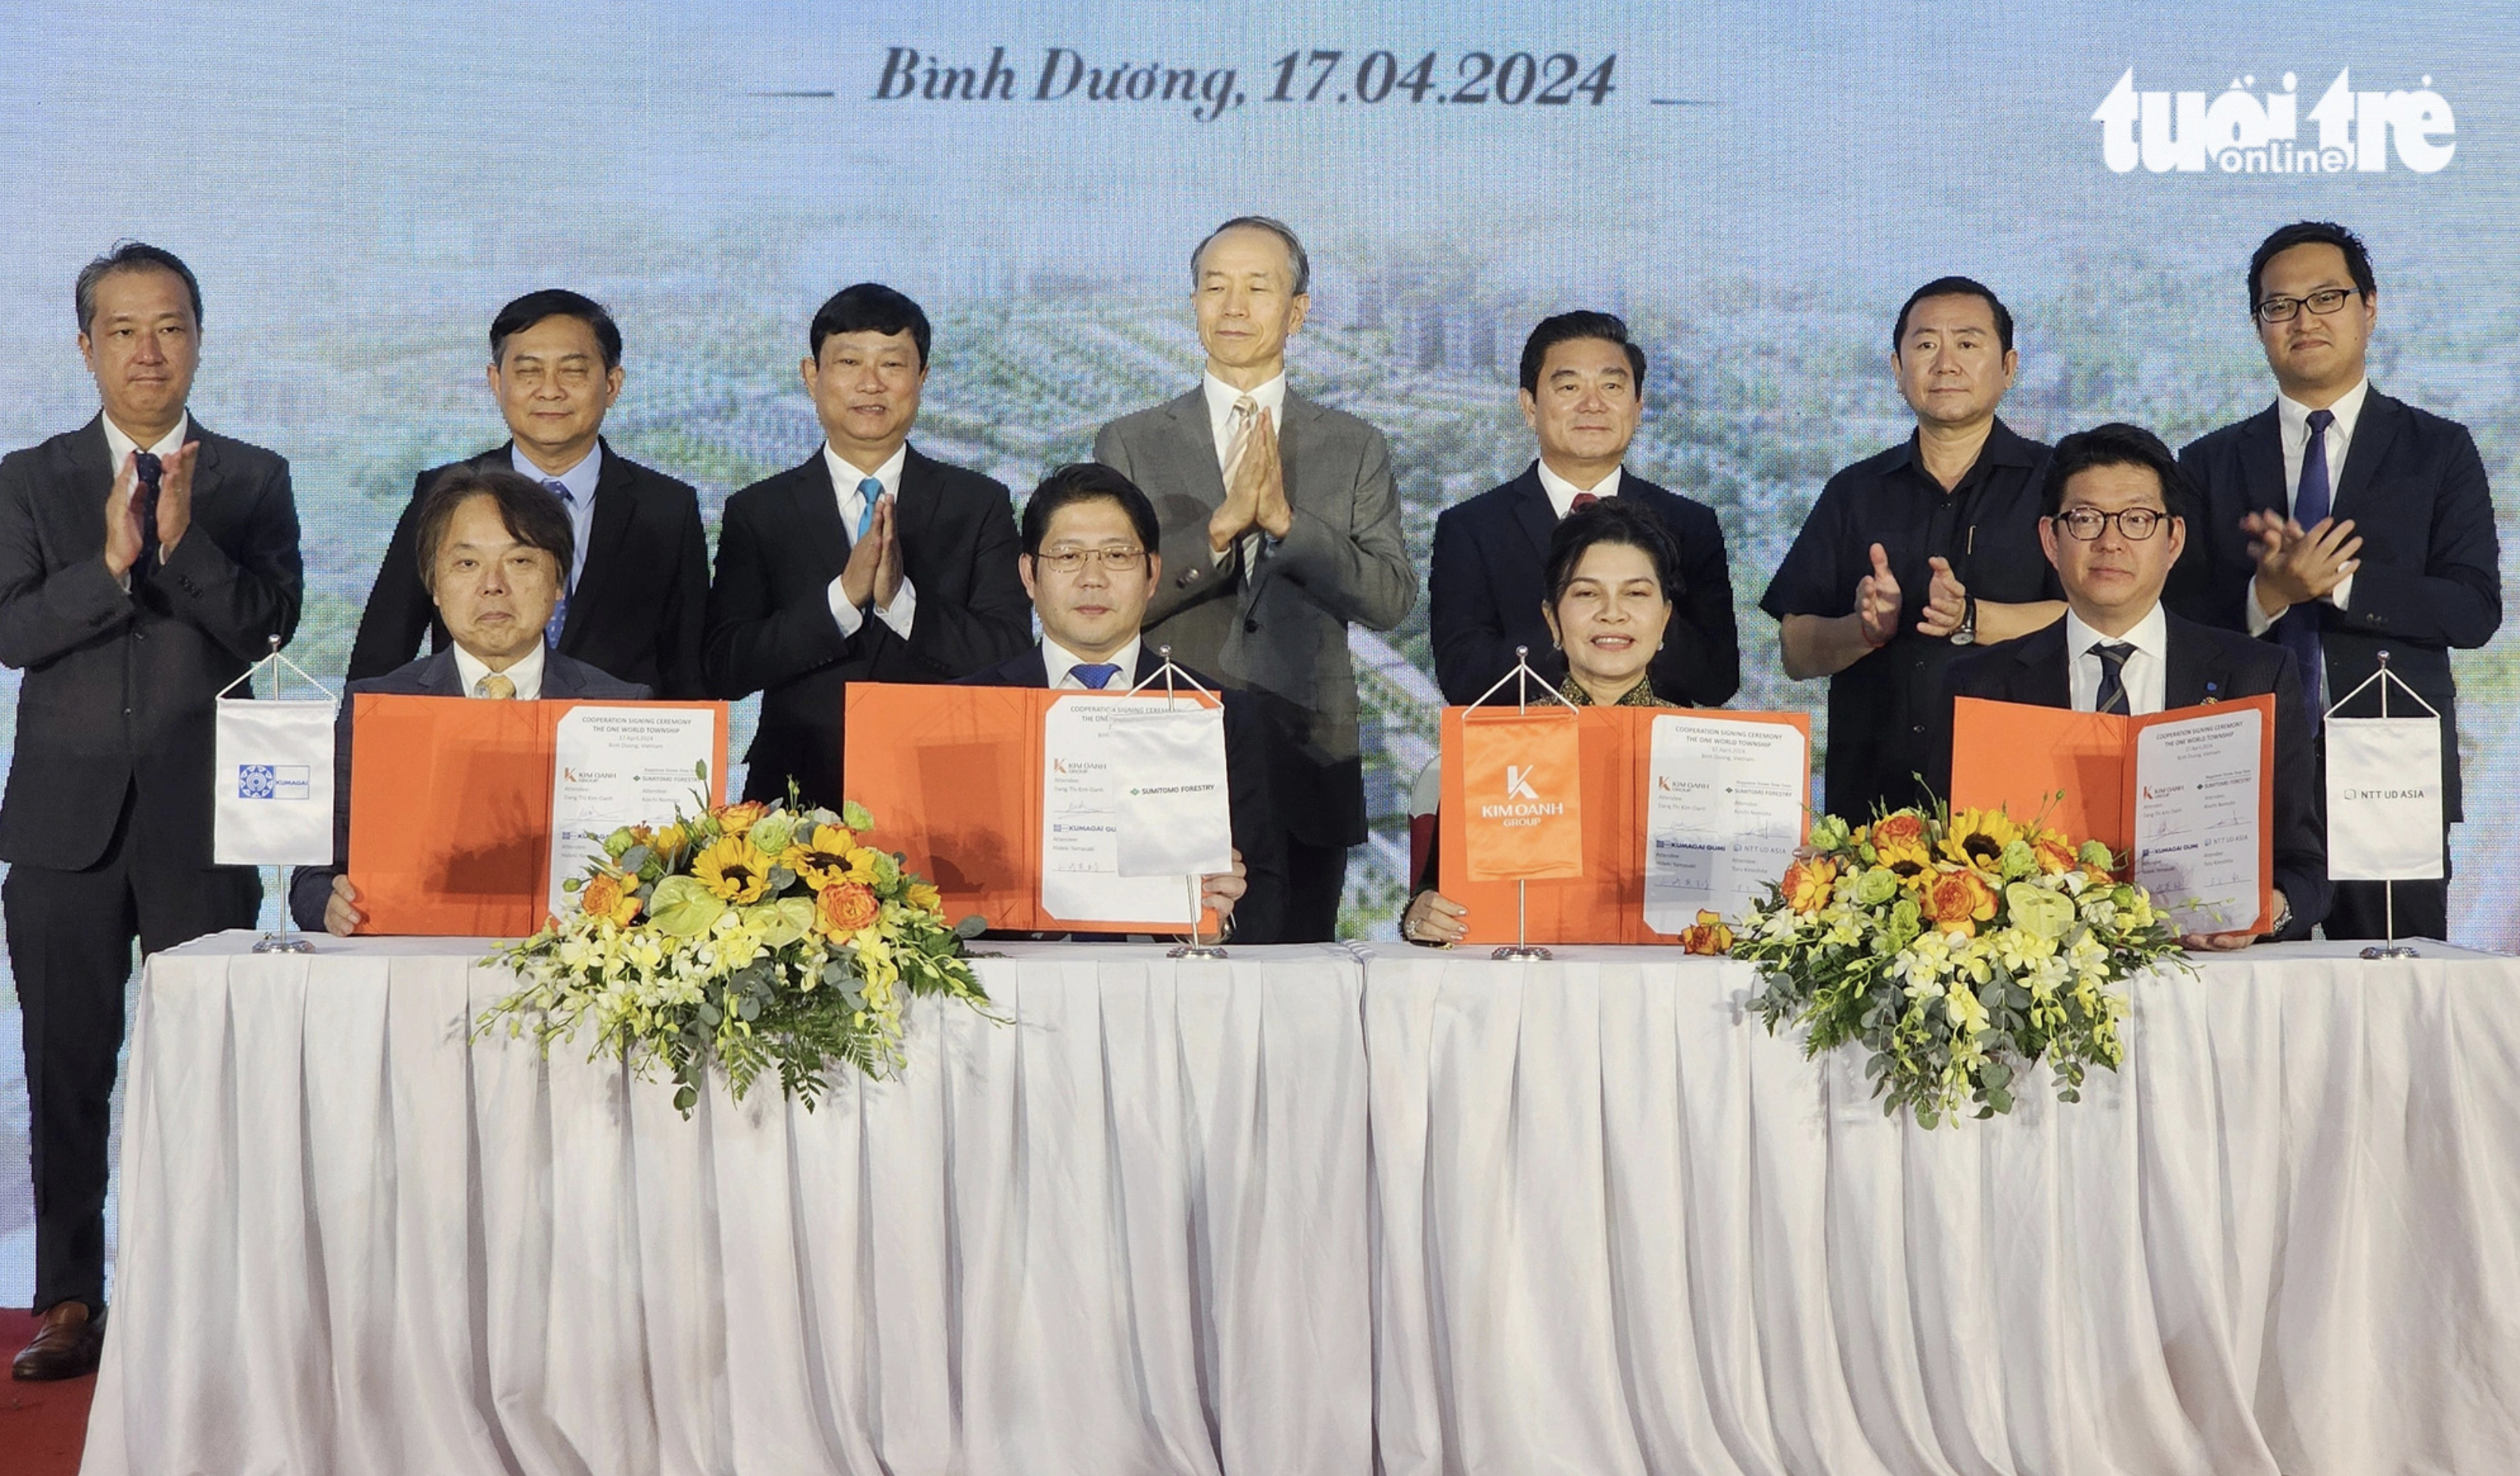 Japanese firms and a Vietnamese company sign a deal to develop the US$1-billion ‘The One World’ urban area project in Binh Duong Province. Photo: Ba Son / Tuoi Tre